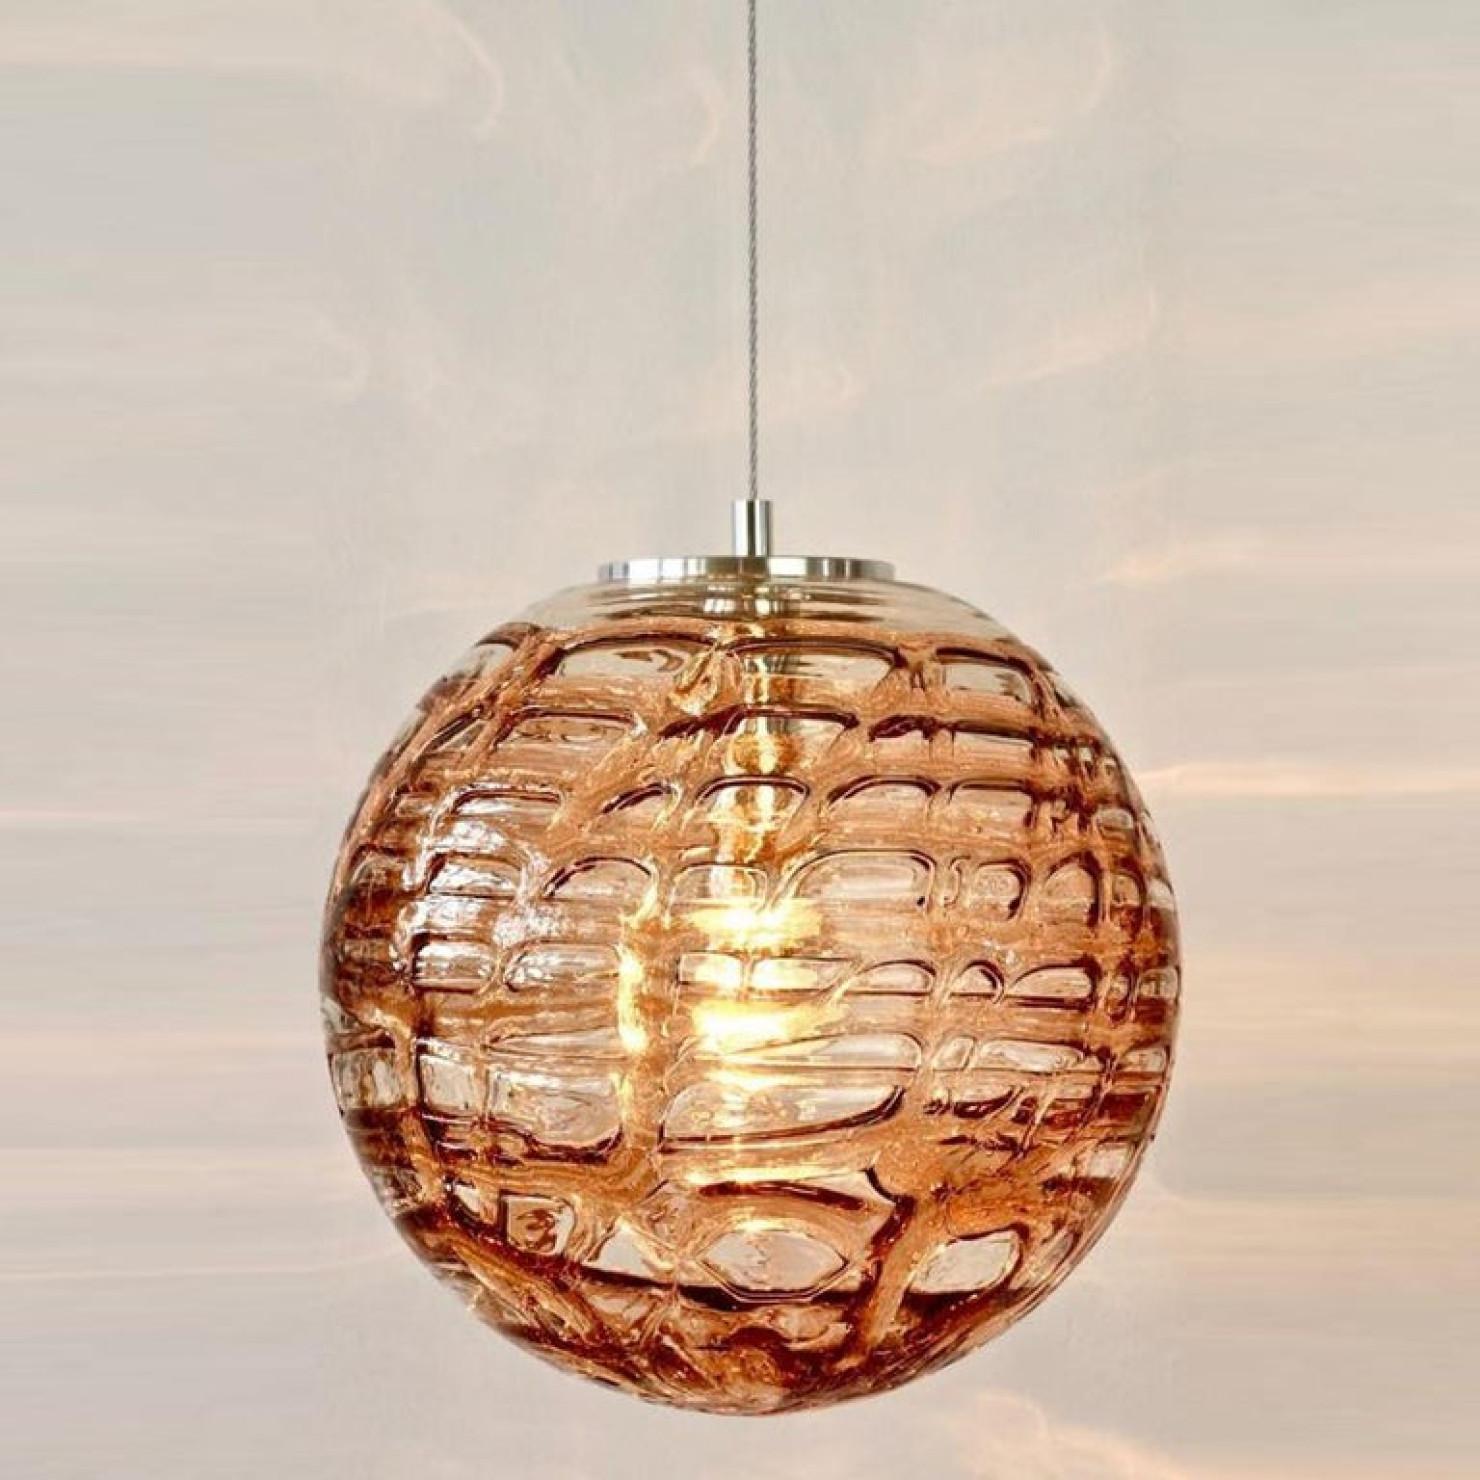 Steel Exceptional Set of 3 Murano Glass Pendant Lights Venini Style, 1960s For Sale